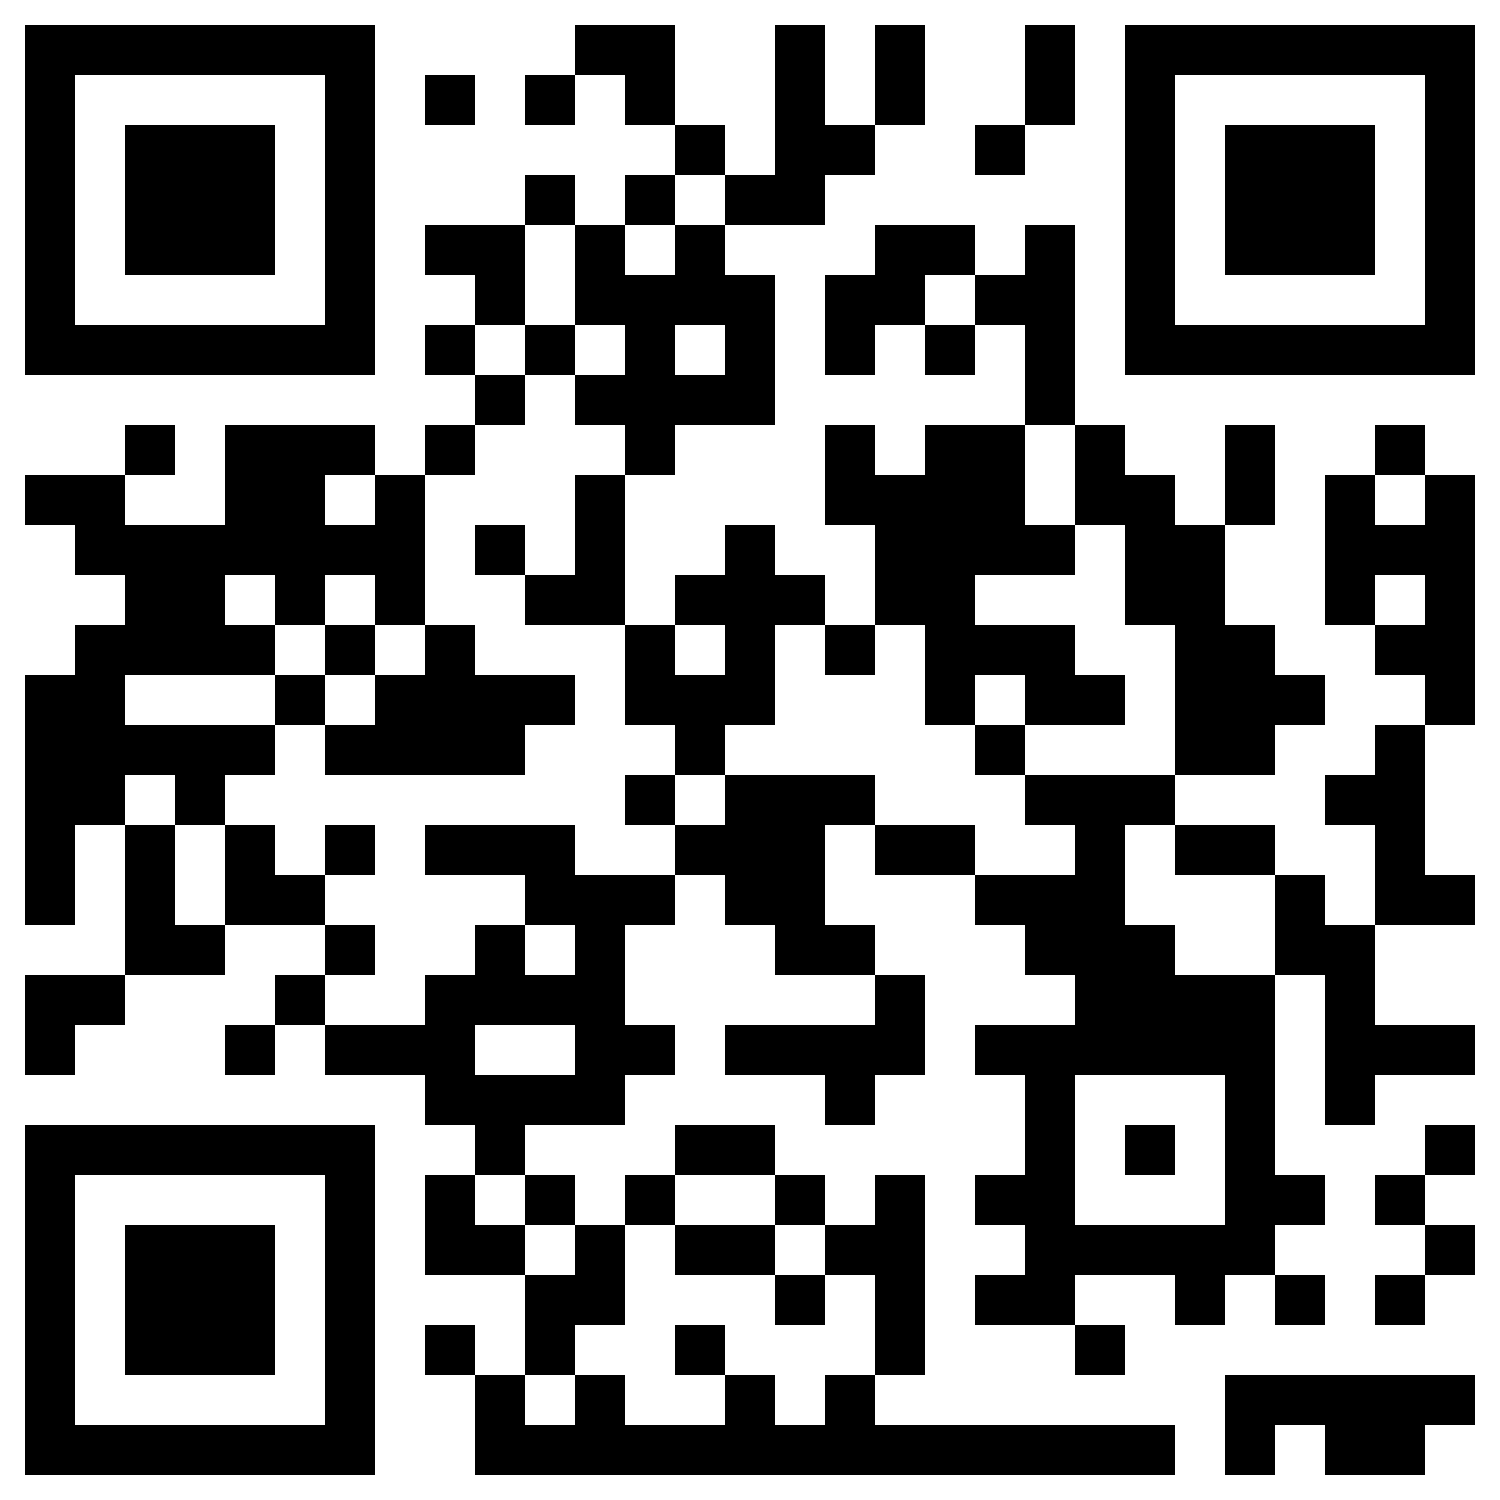 Scan QR Code to visit COVID reporting tool